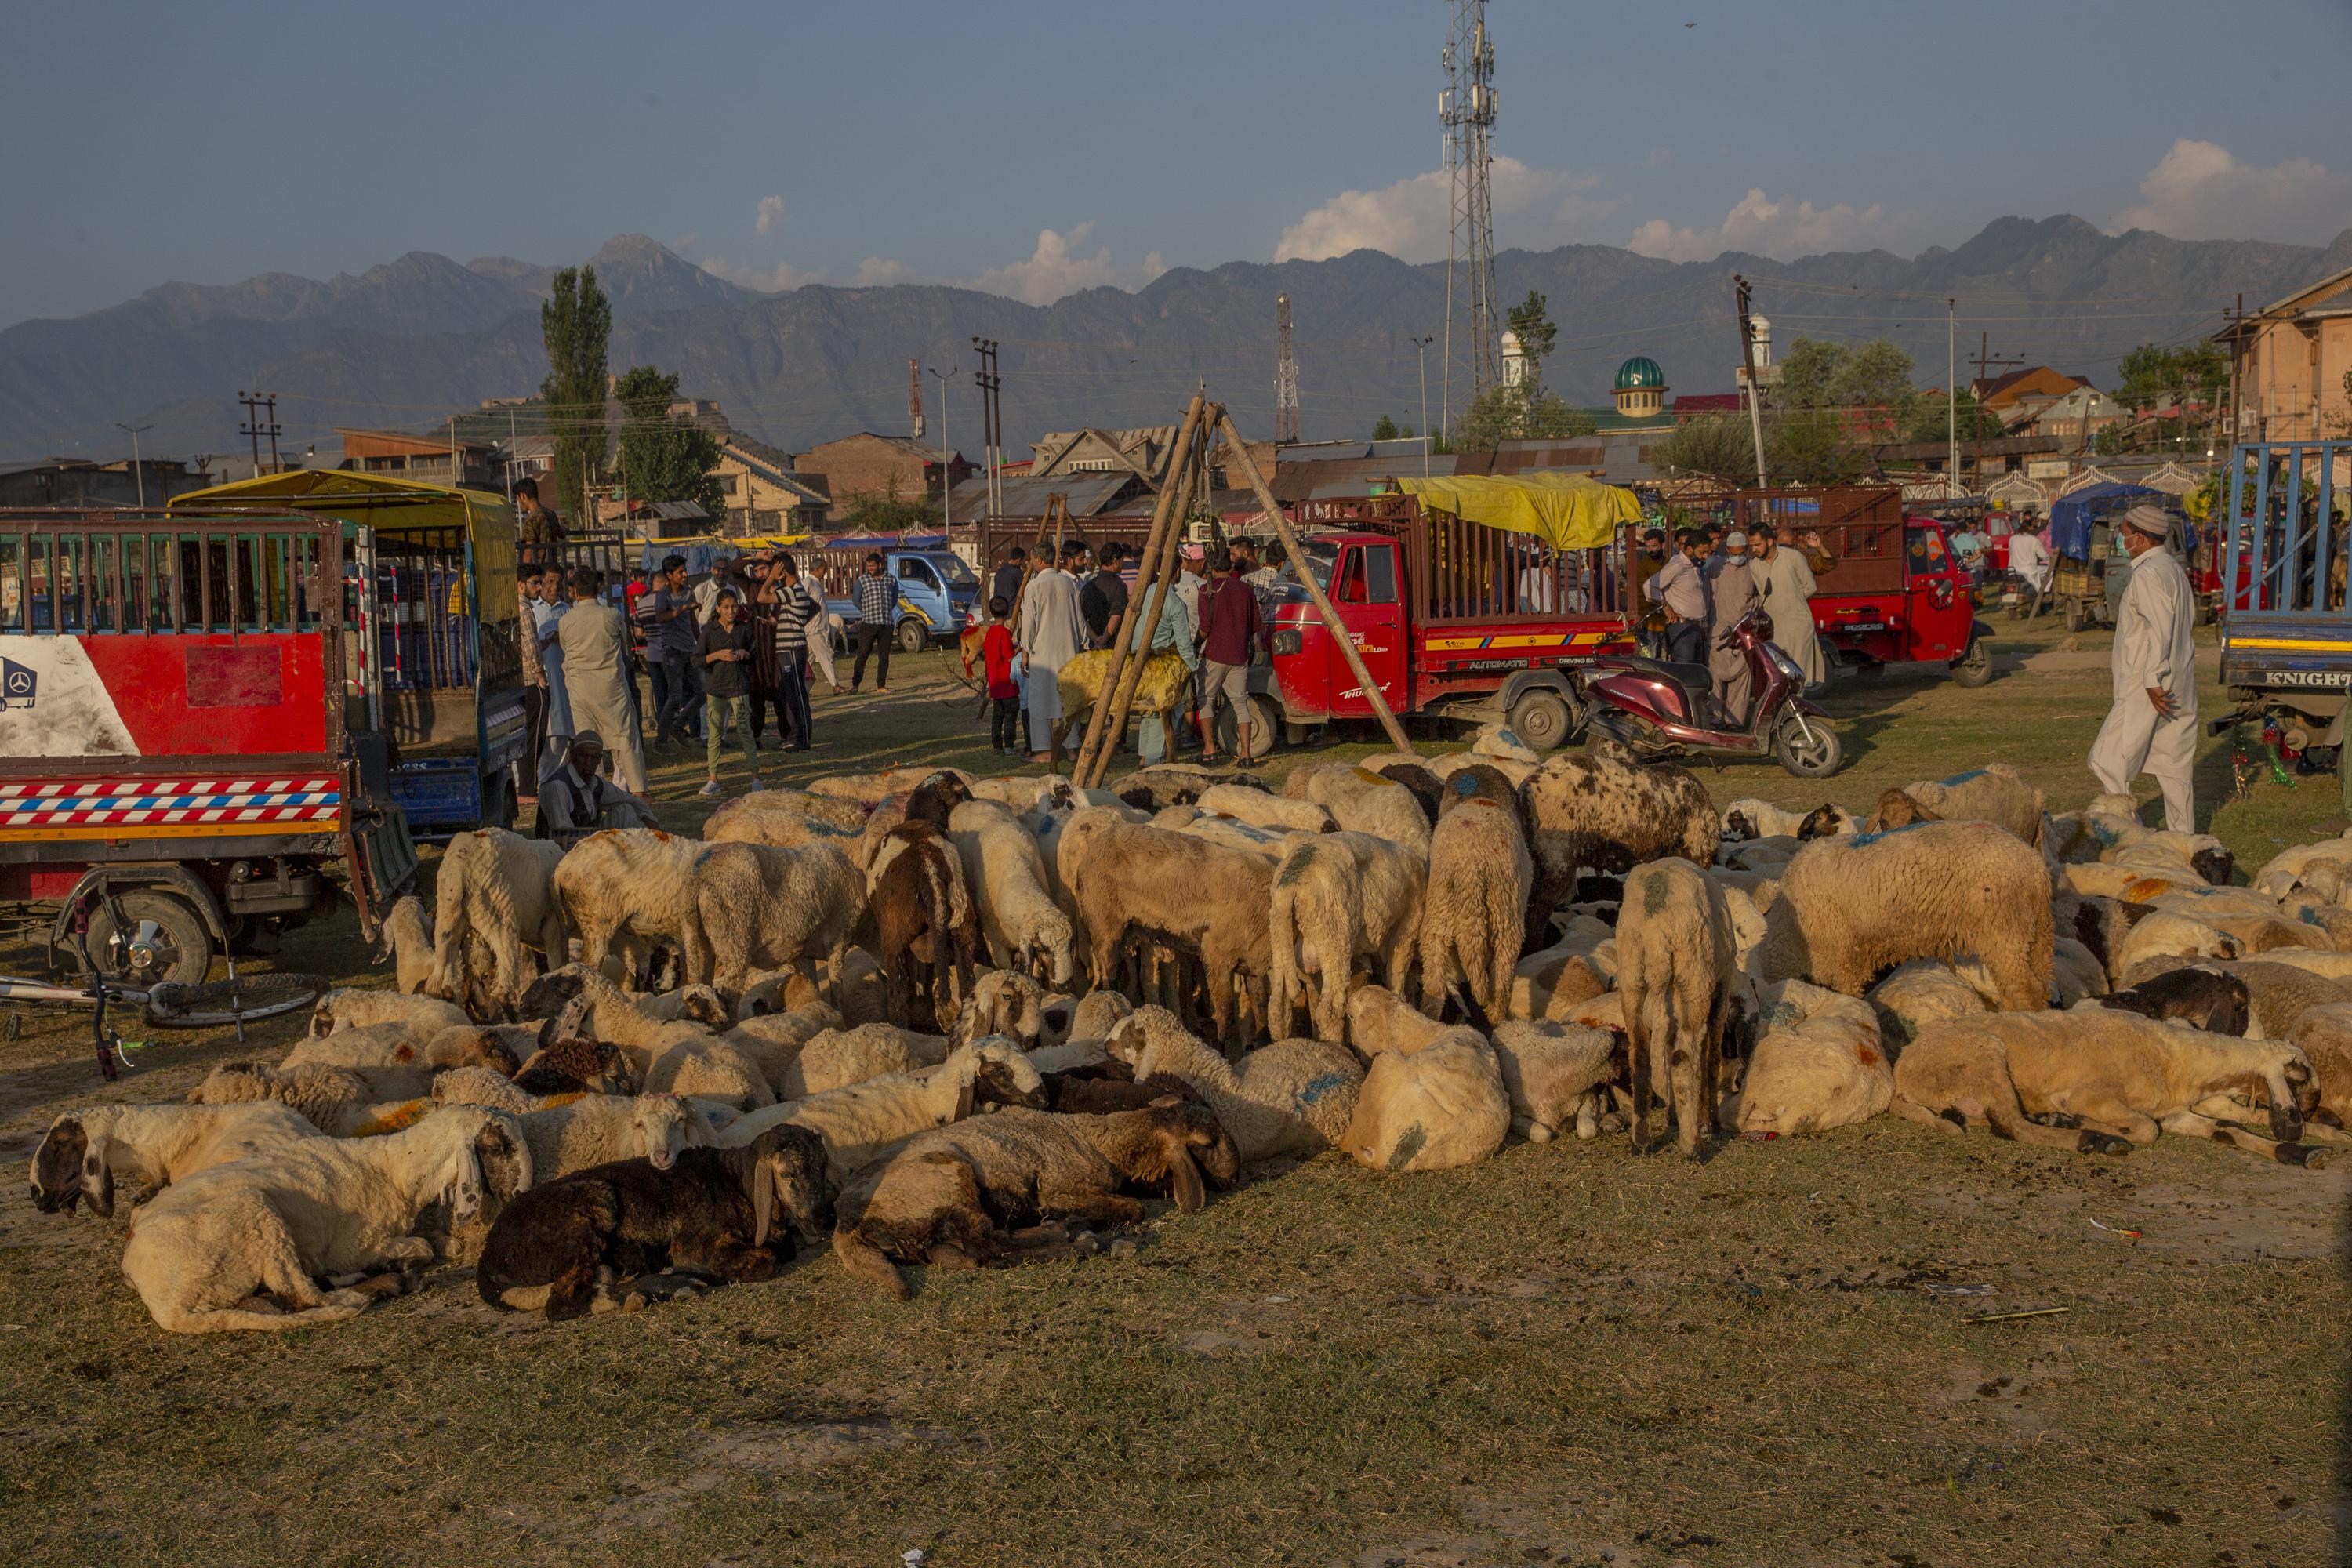 Officials now say no ban on animal sacrifice in Kashmir | AP News